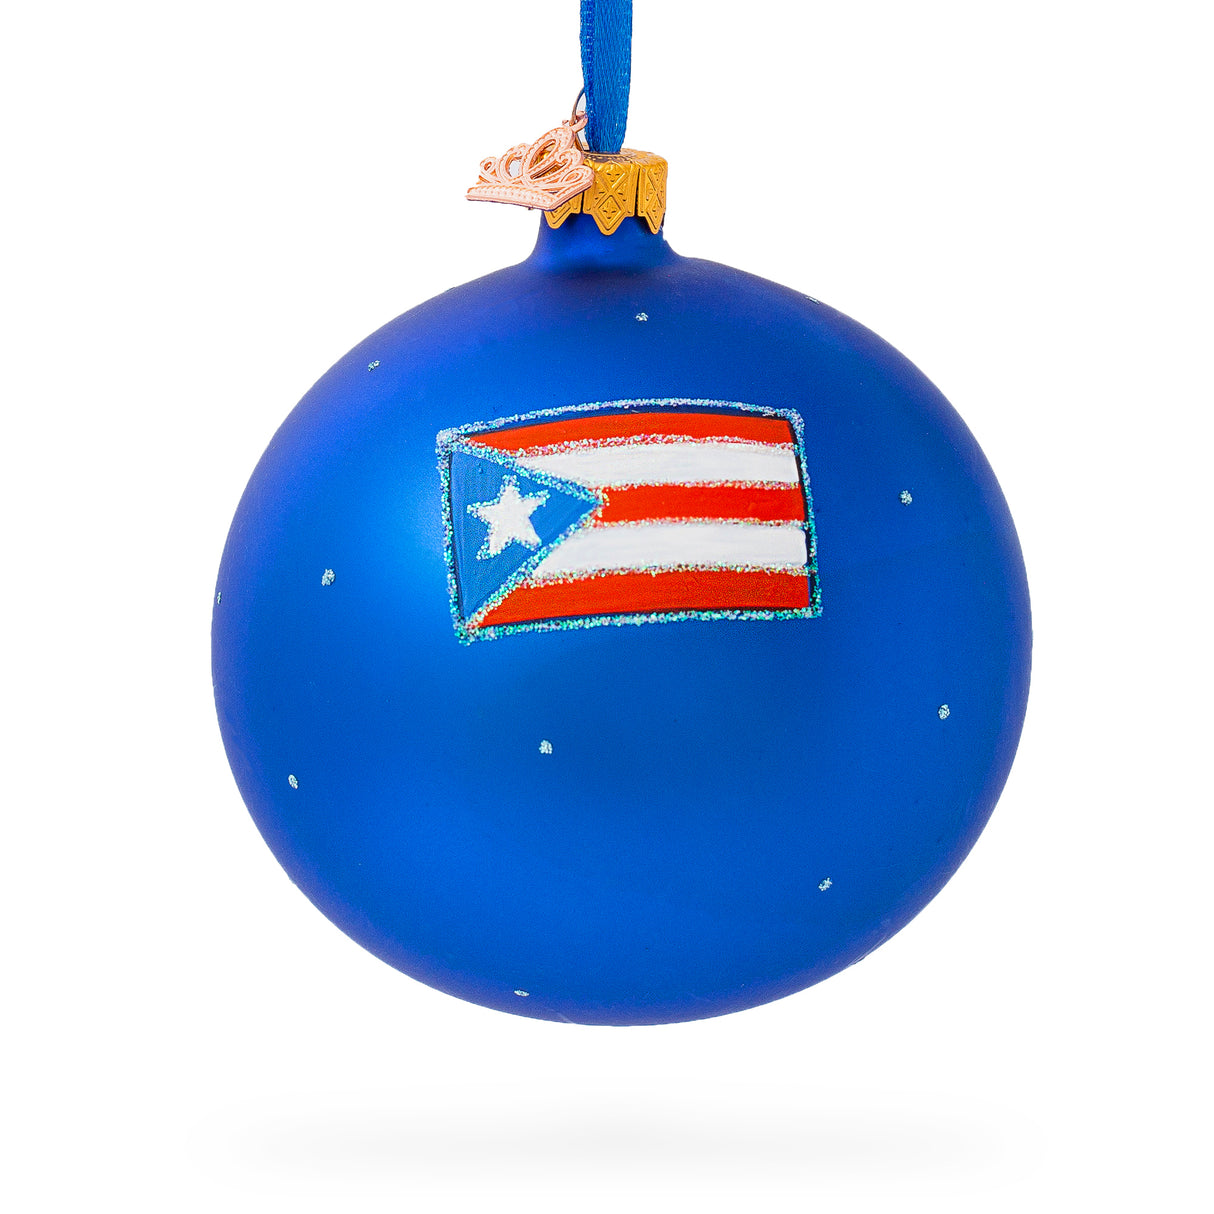 Buy Christmas Ornaments > Travel > North America > USA > Puerto Rico by BestPysanky Online Gift Ship